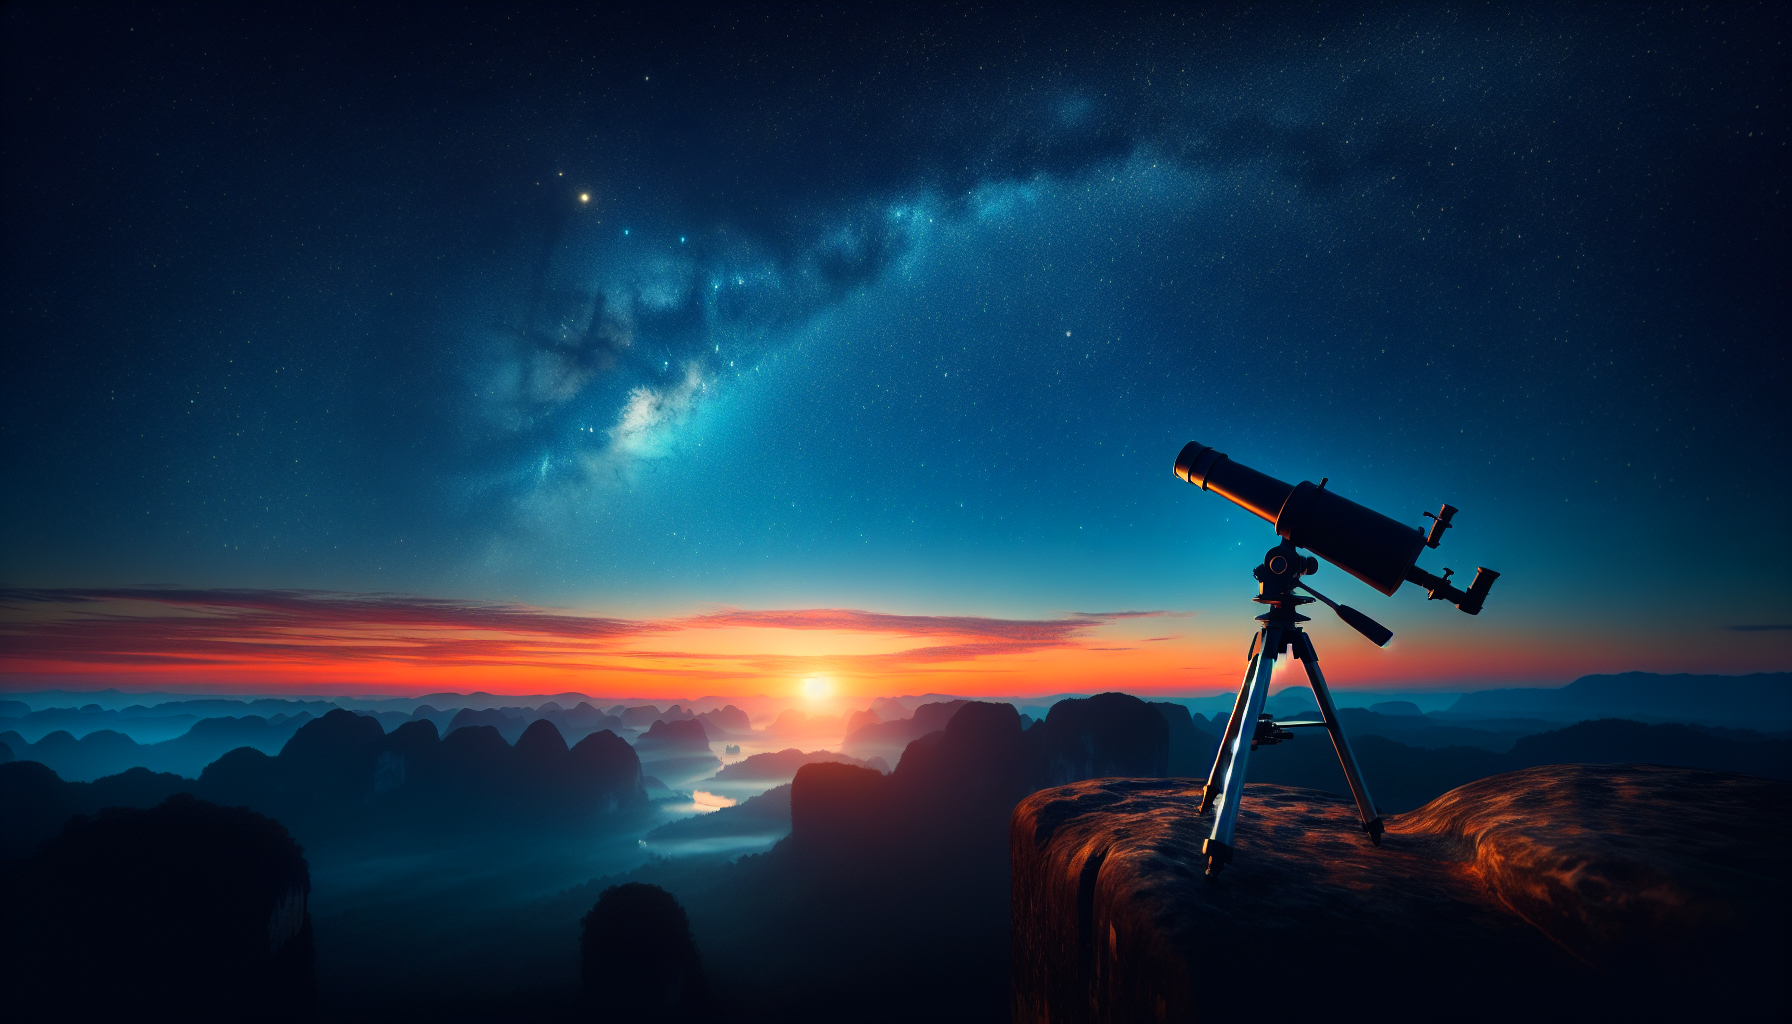 Are There Any Secret Spots For Stargazing Or Observing Celestial Phenomena?